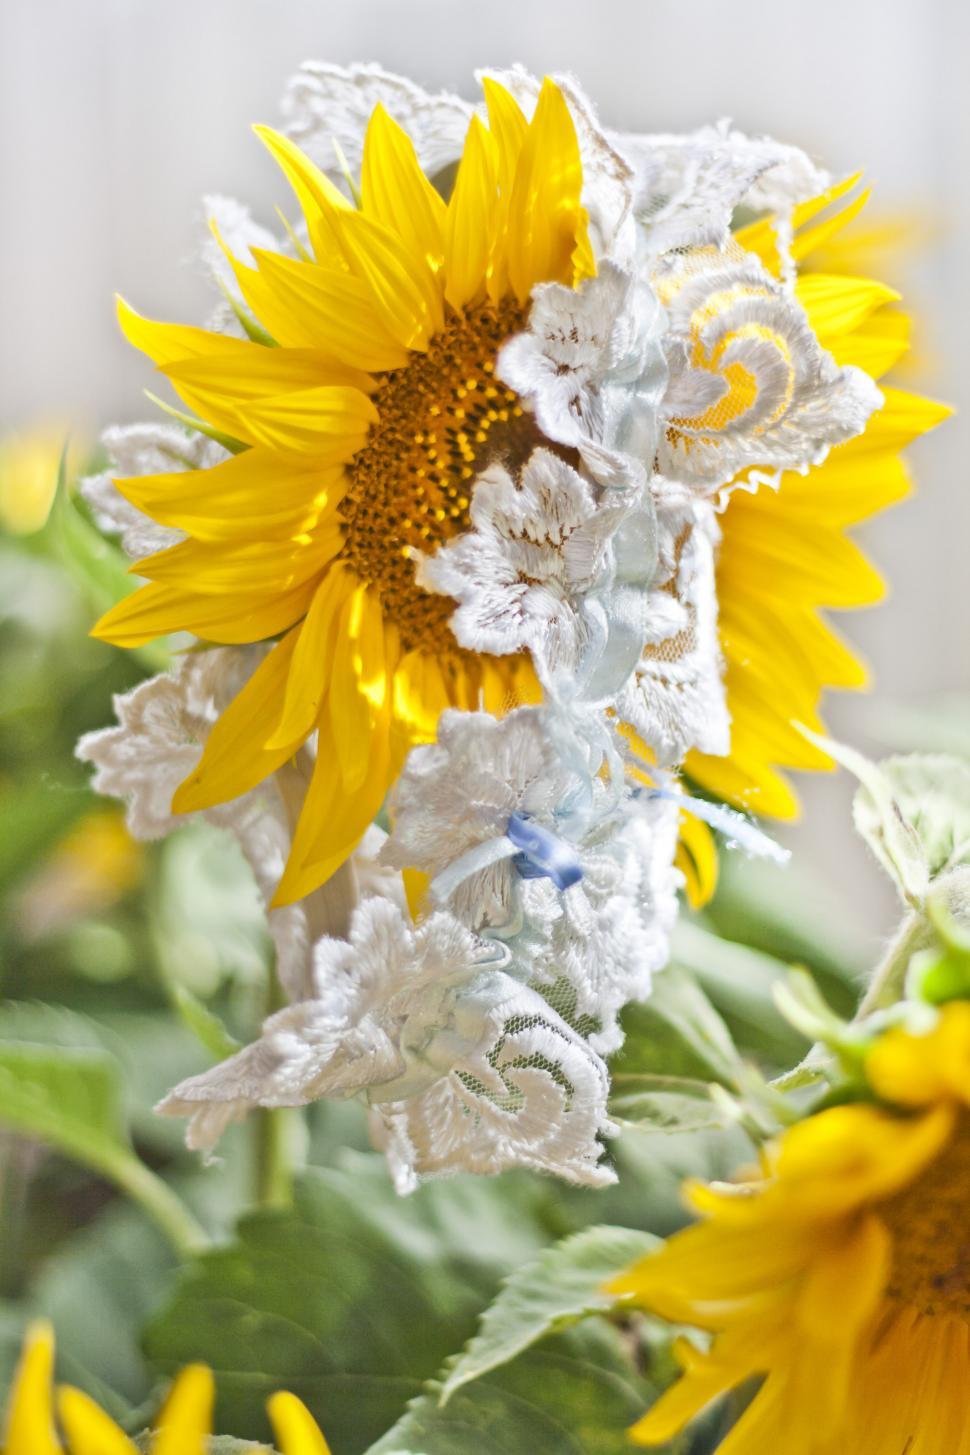 Free Image of Close Up of a Sunflower With Other Flowers in Background 